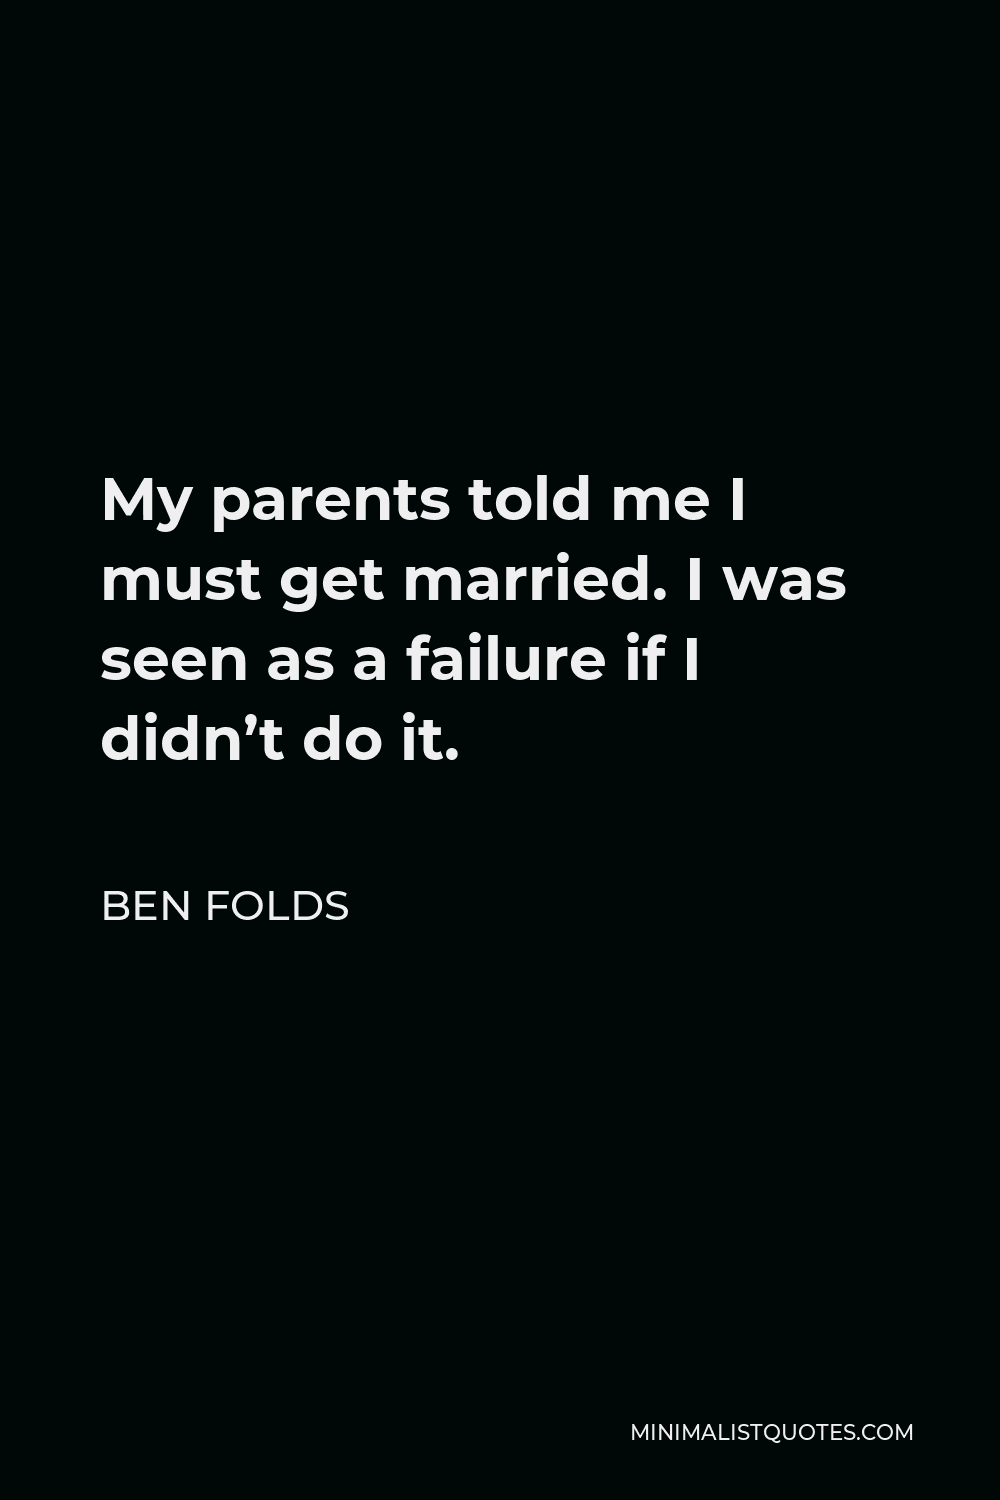 Ben Folds Quote - My parents told me I must get married. I was seen as a failure if I didn’t do it.